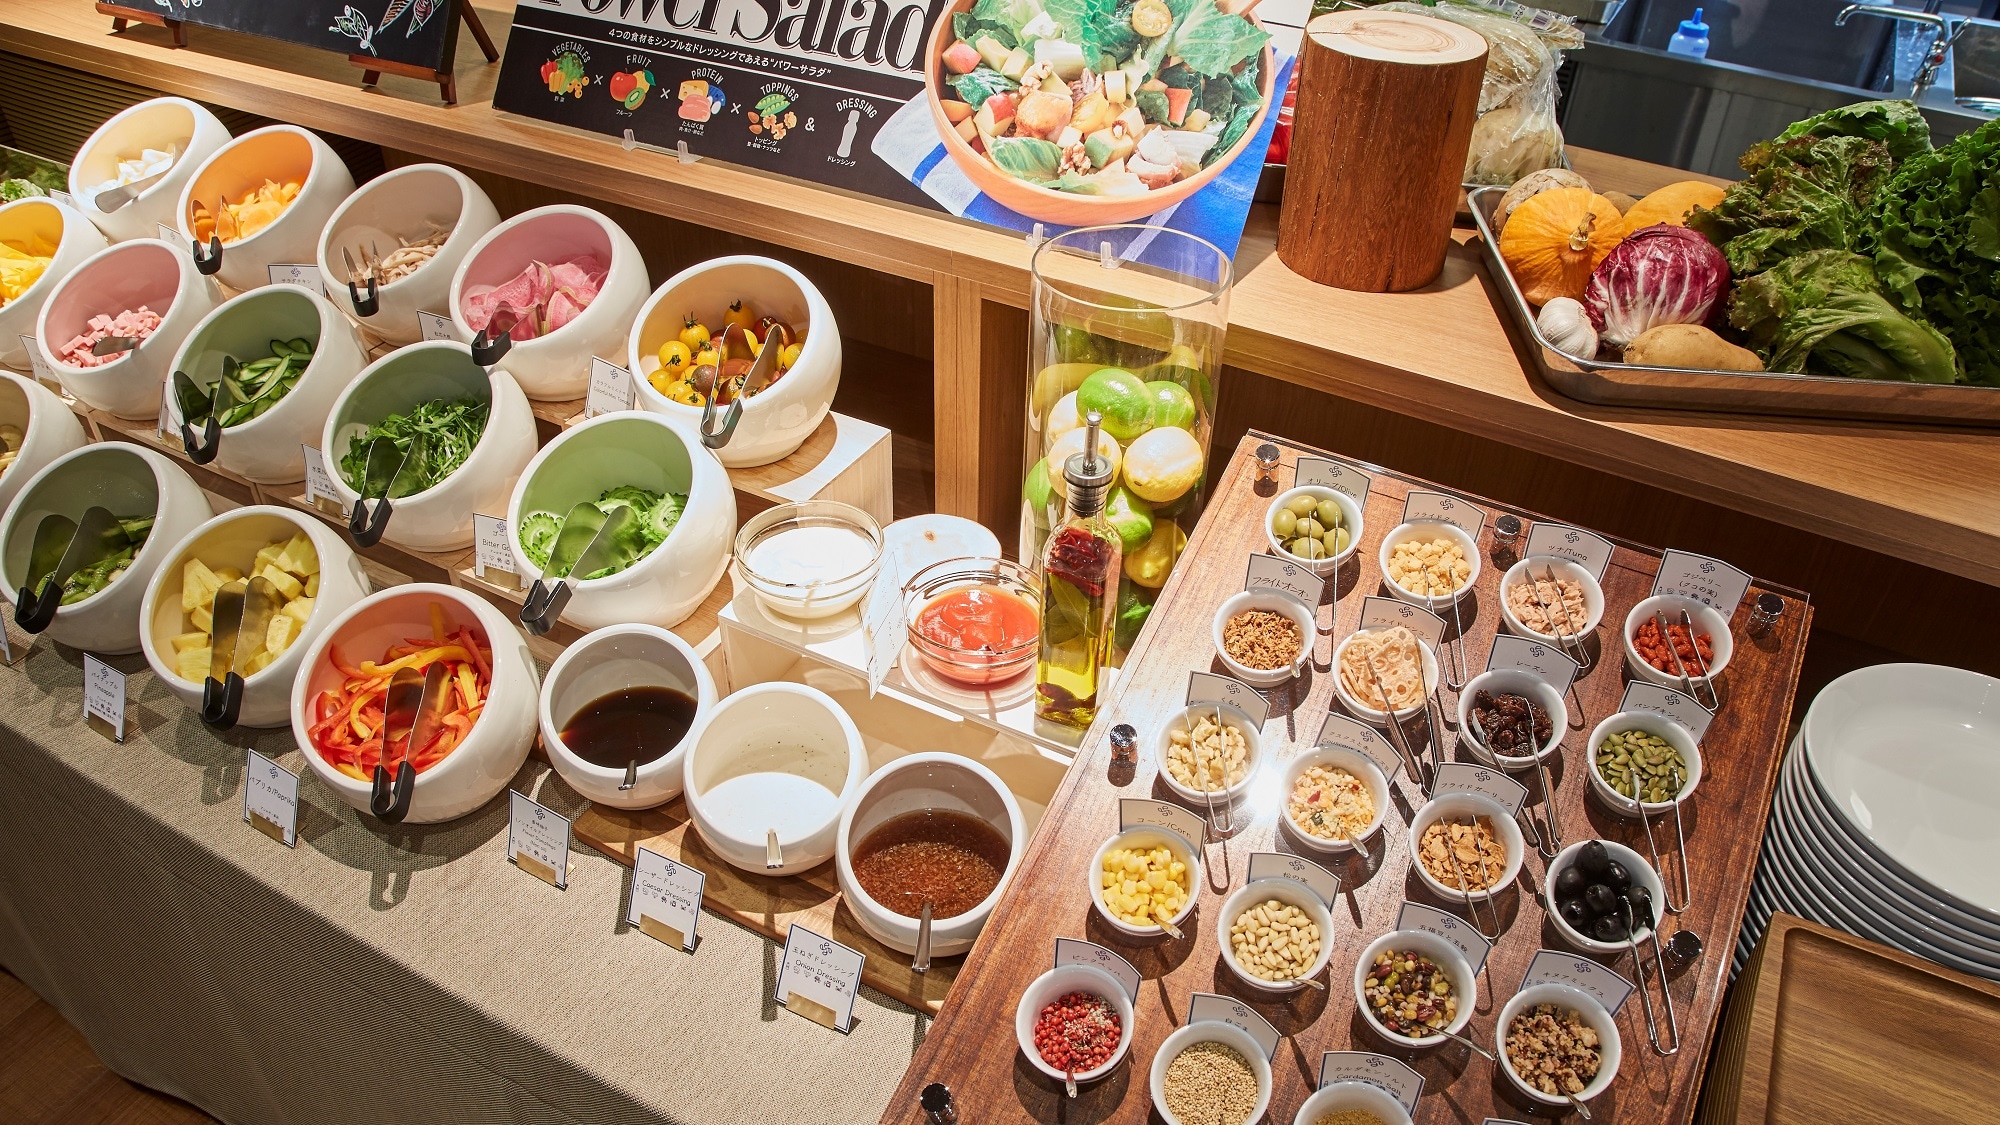 Brighten up your morning with a colorful salad buffet!